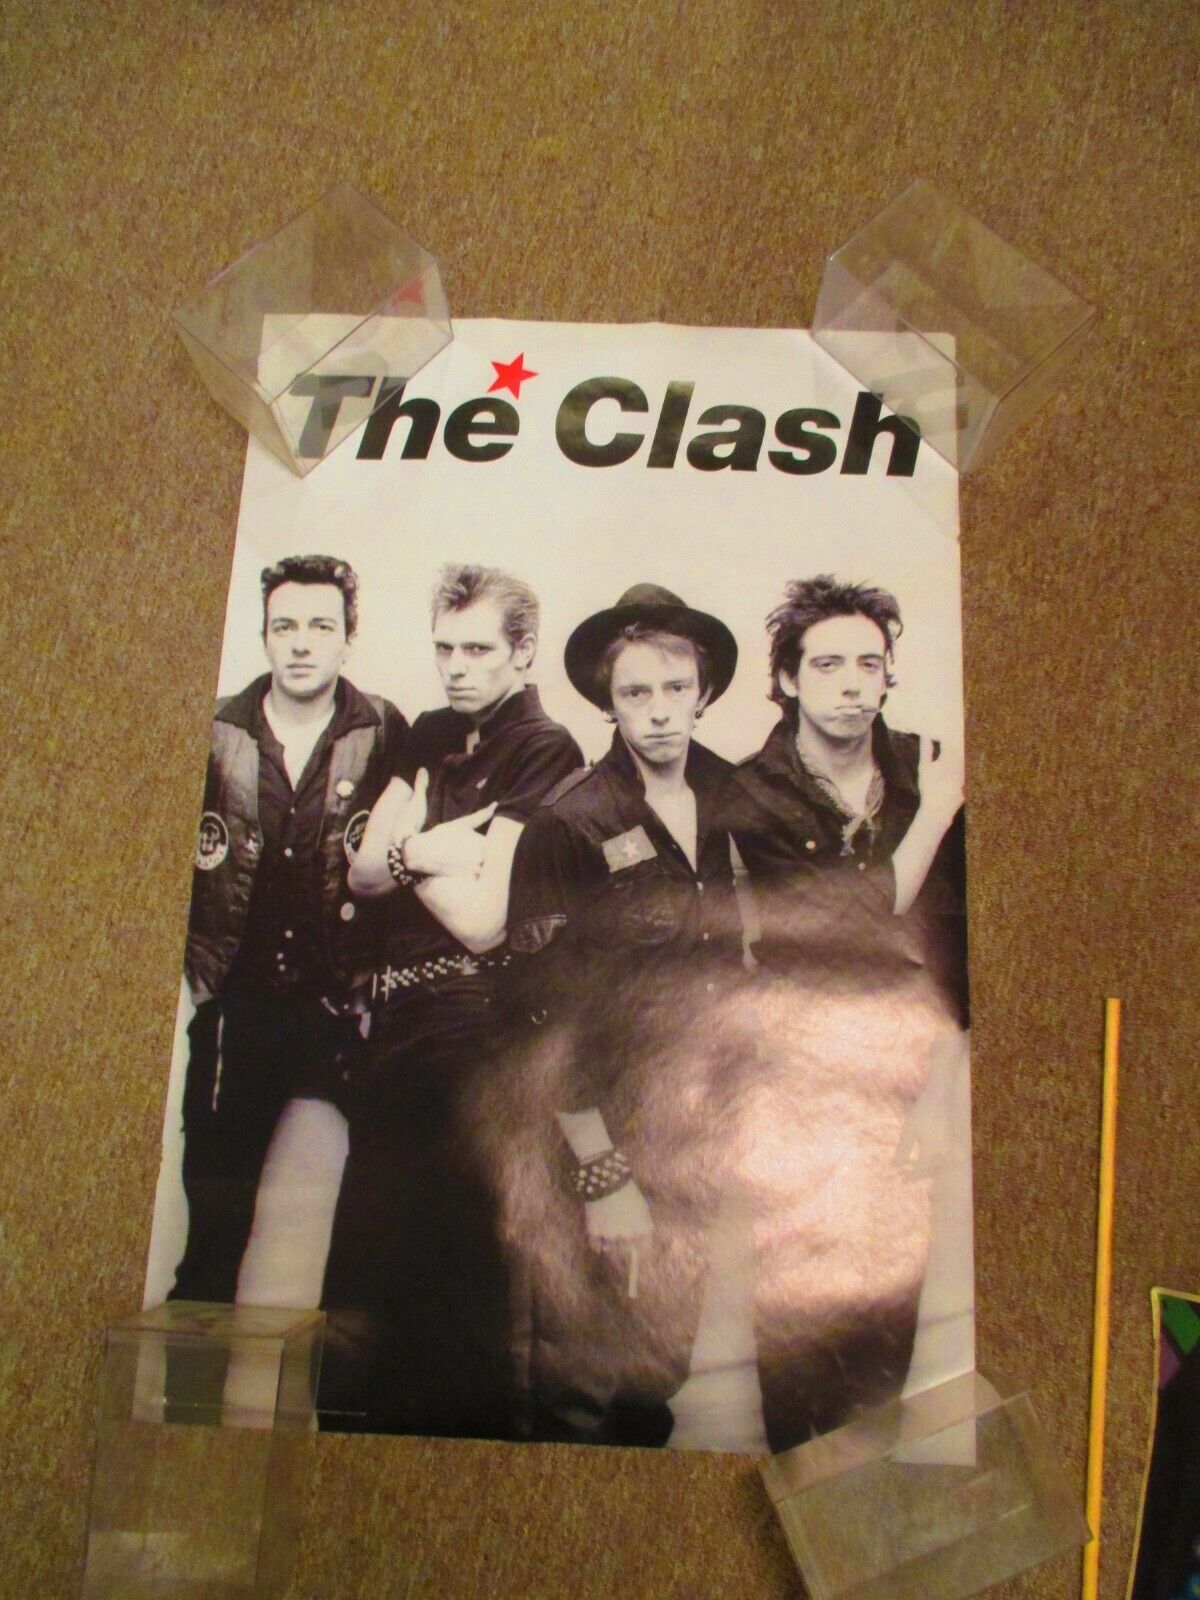 The Clash  2 Sided Promo Poster, 36" X 24", Fine/fine+, Sony 1999